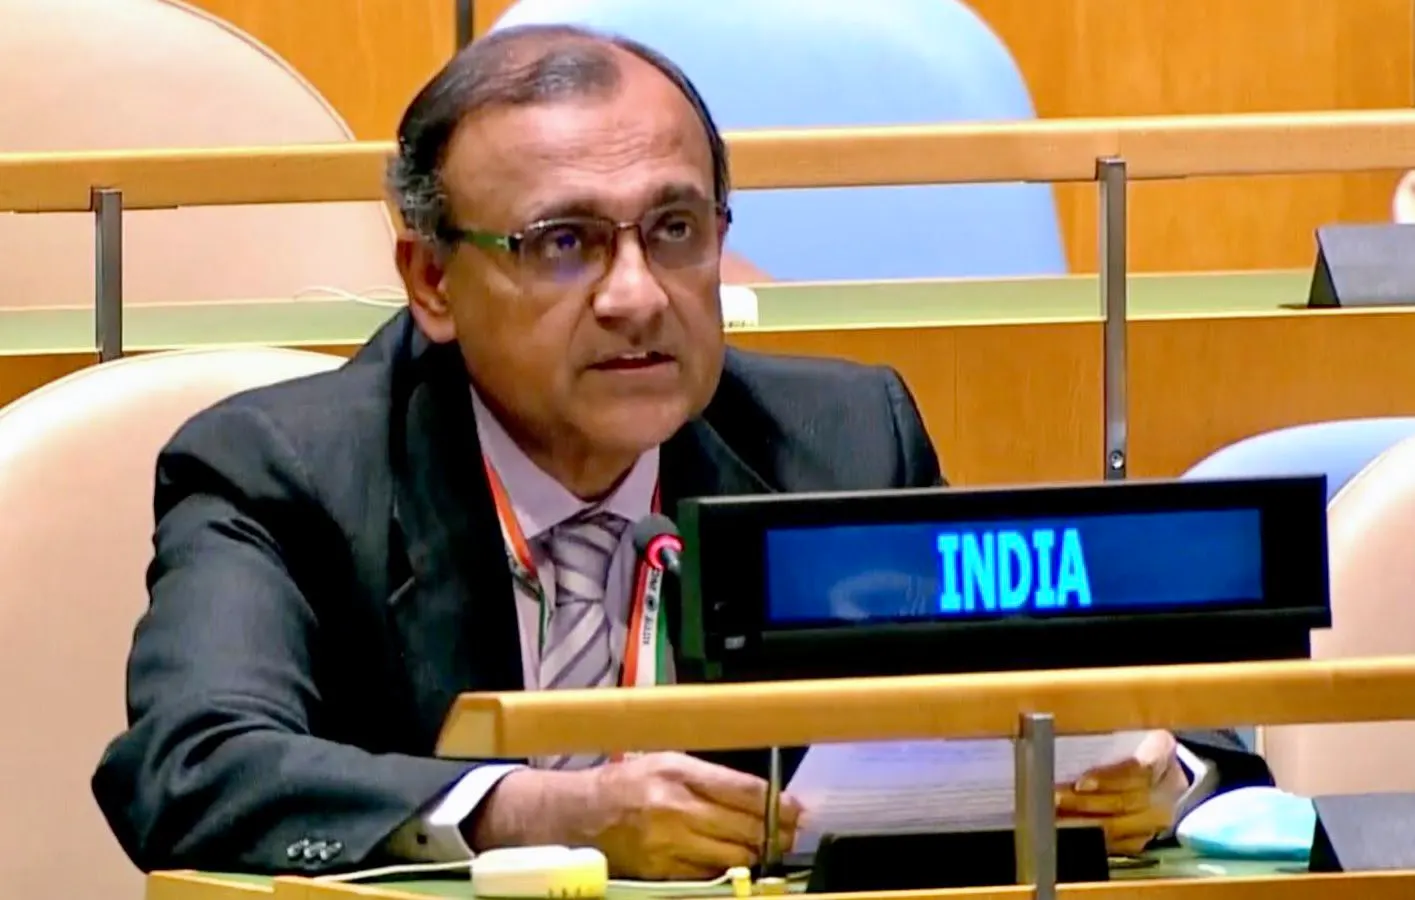 Ukraine crisis: India abstains from vote on calling emergency session of UN General Assembly